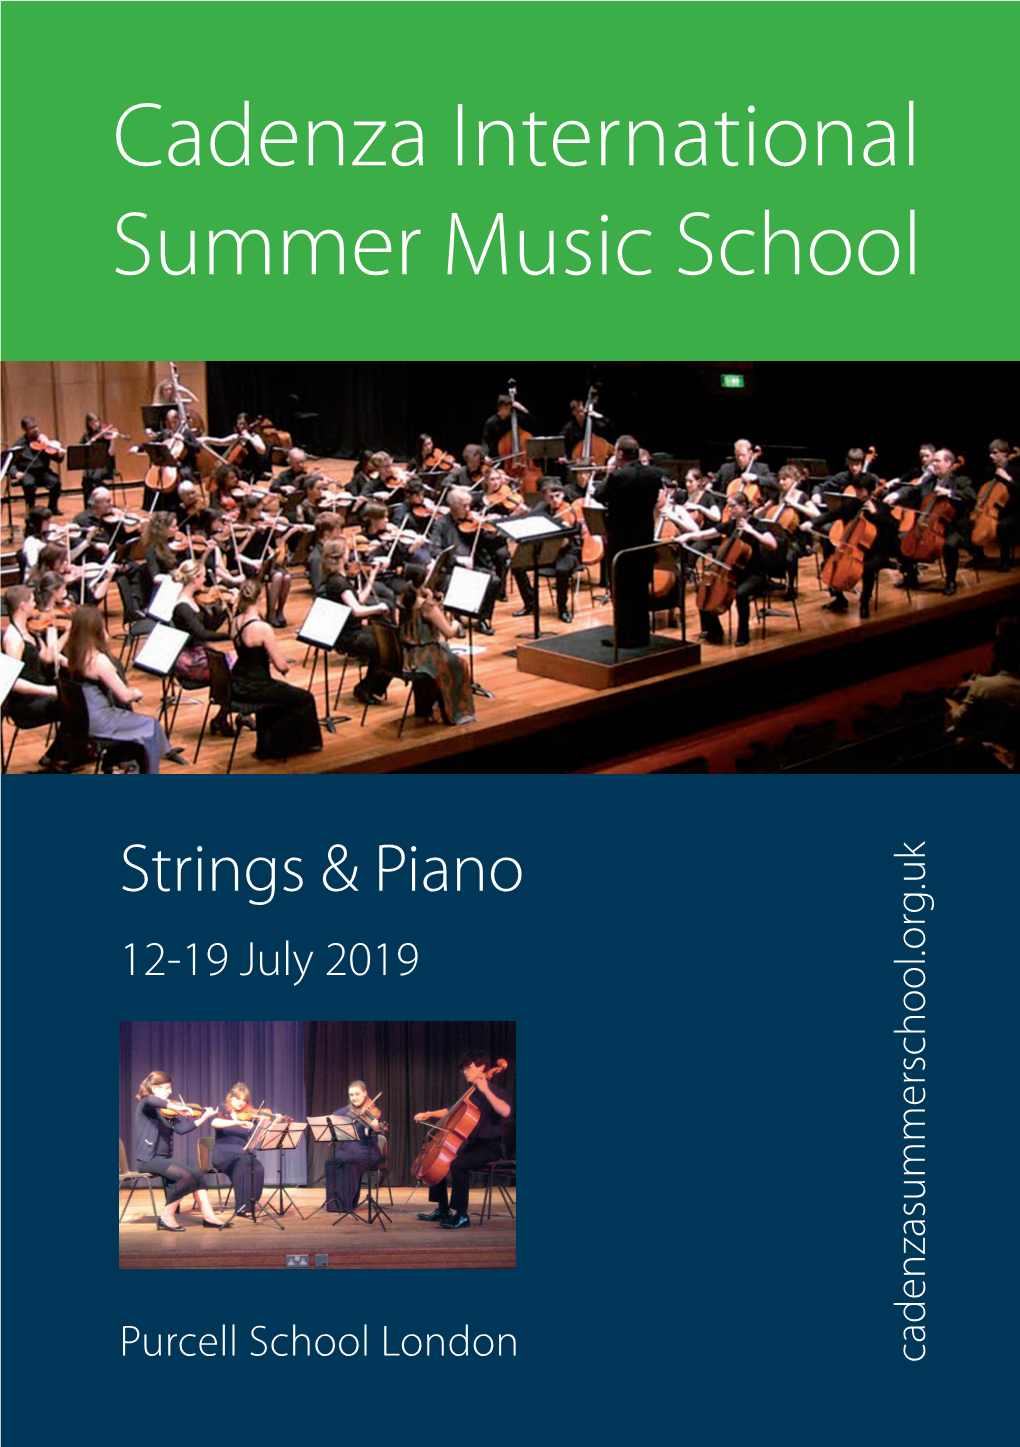 Cadenza International Summer Music School for Strings and Piano